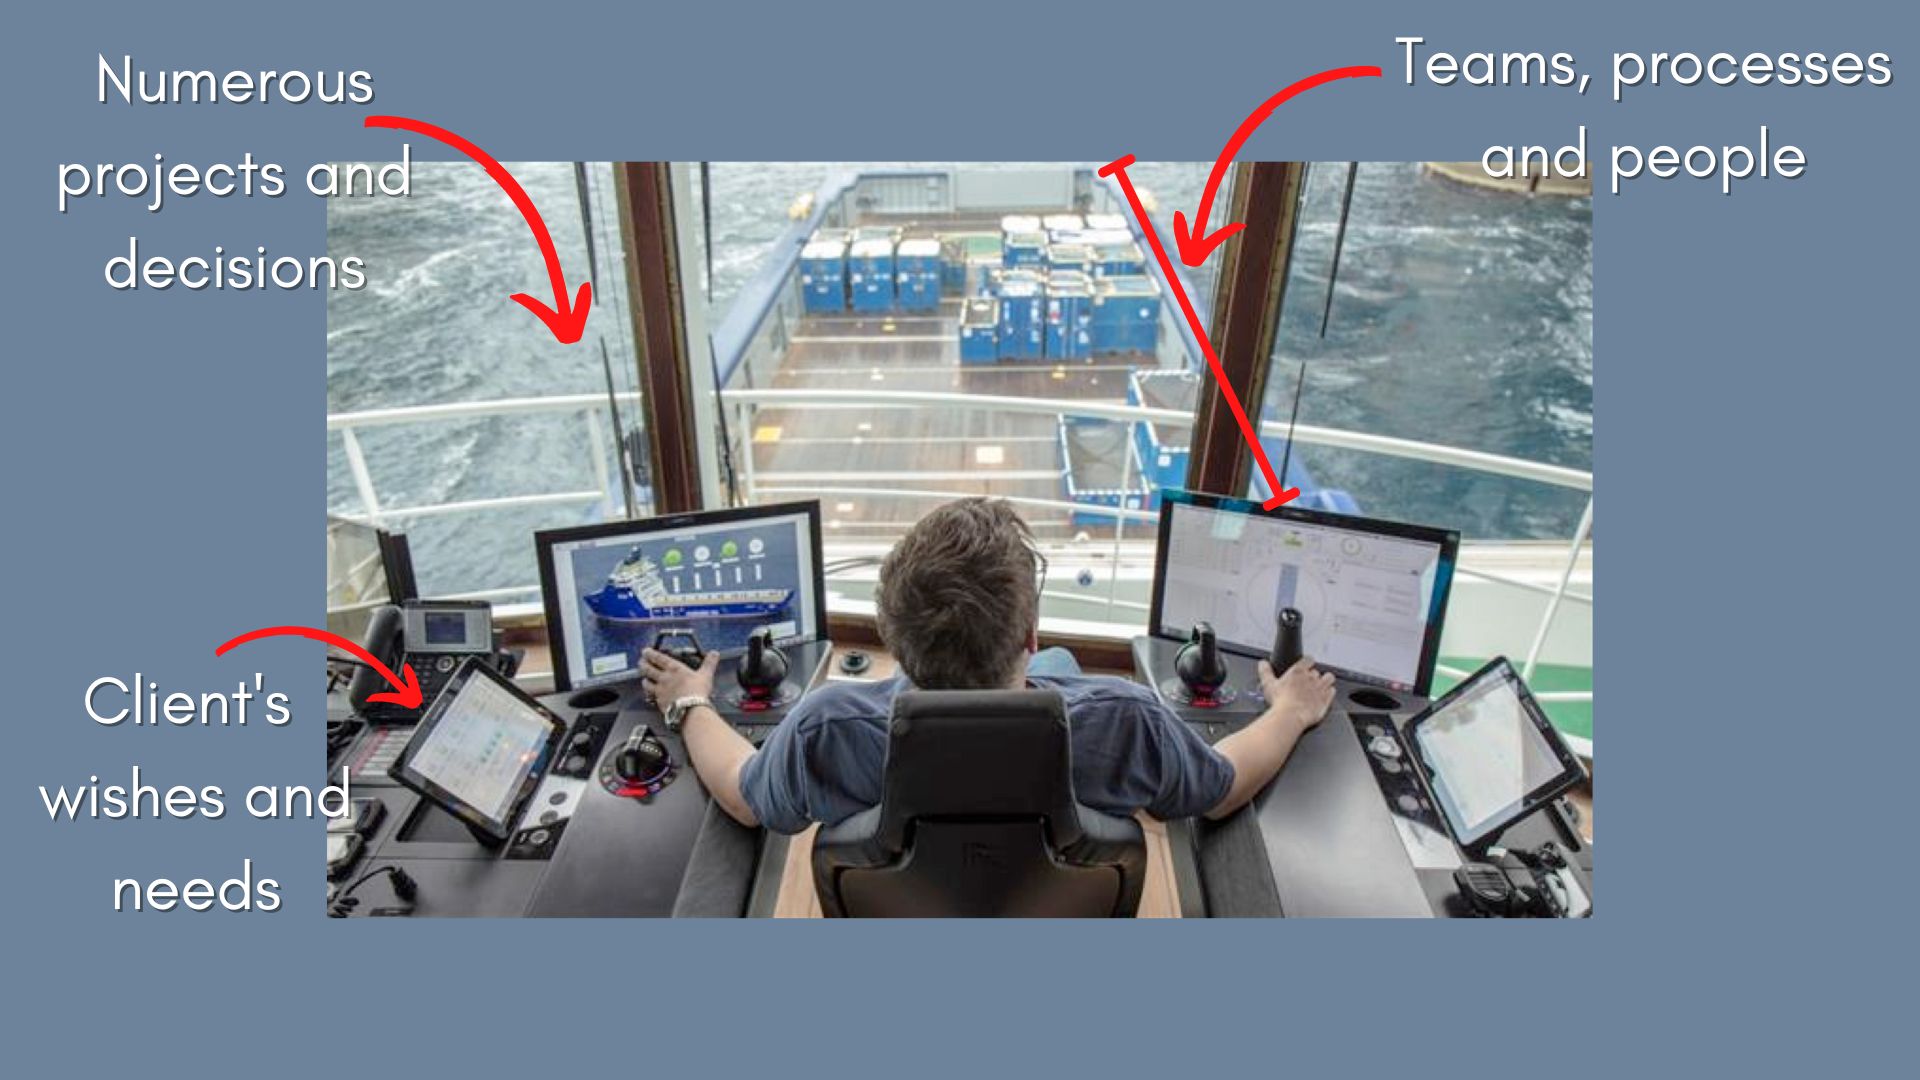 An image from behind of a man piloting a ship over troubled waters. There's an arrow showing the length of the ship saying 'teams, processes and people', another arrow pointing to the troubled ocean that says 'numerous projects and decisions' and a final arrow pointing out to the ship's computer saying 'client's wishes and needs'